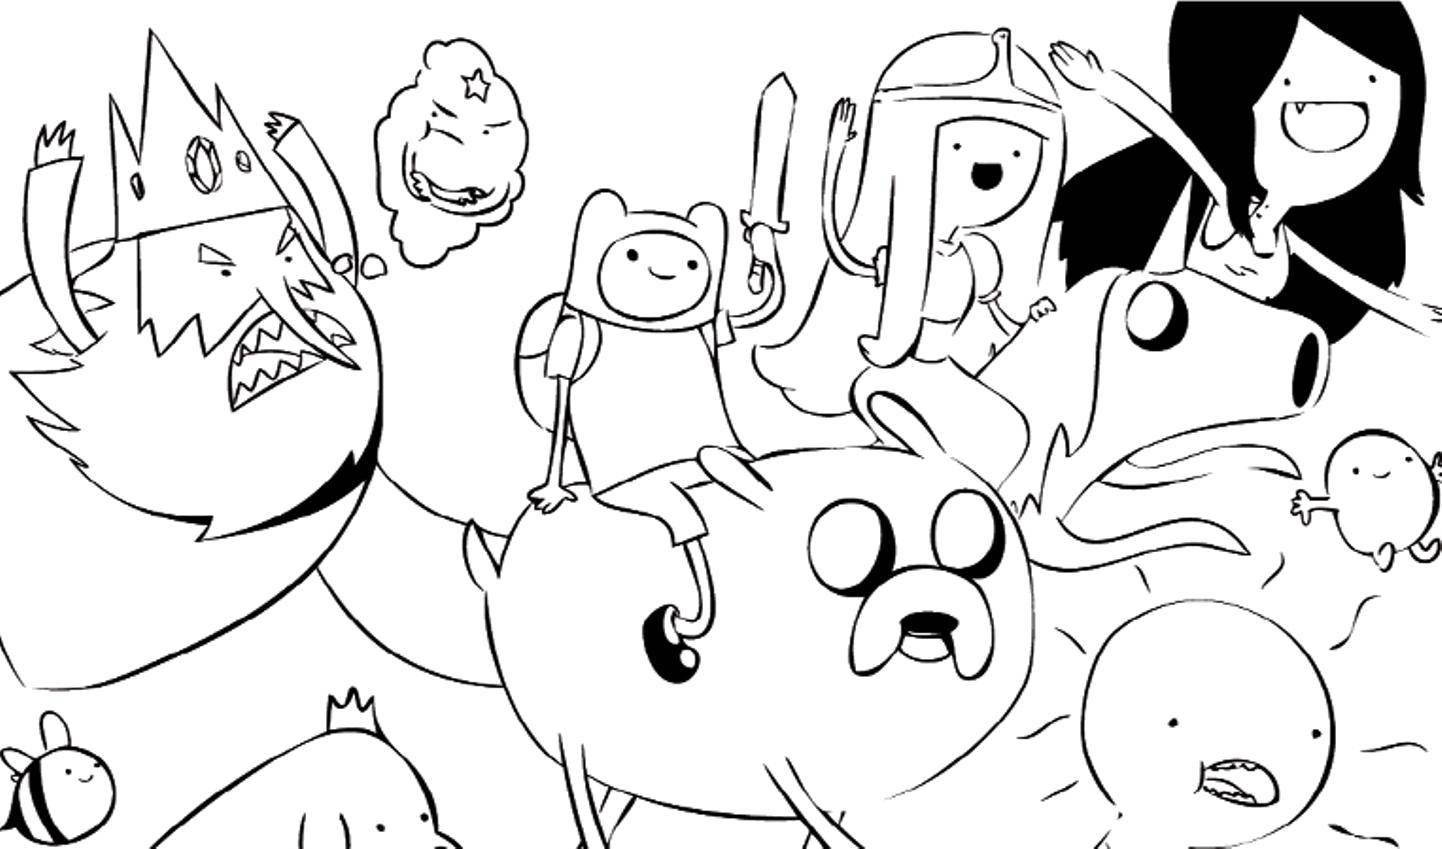 Coloring Adventure time!. Category cartoons. Tags:  The character from the cartoon, Adventure Time.